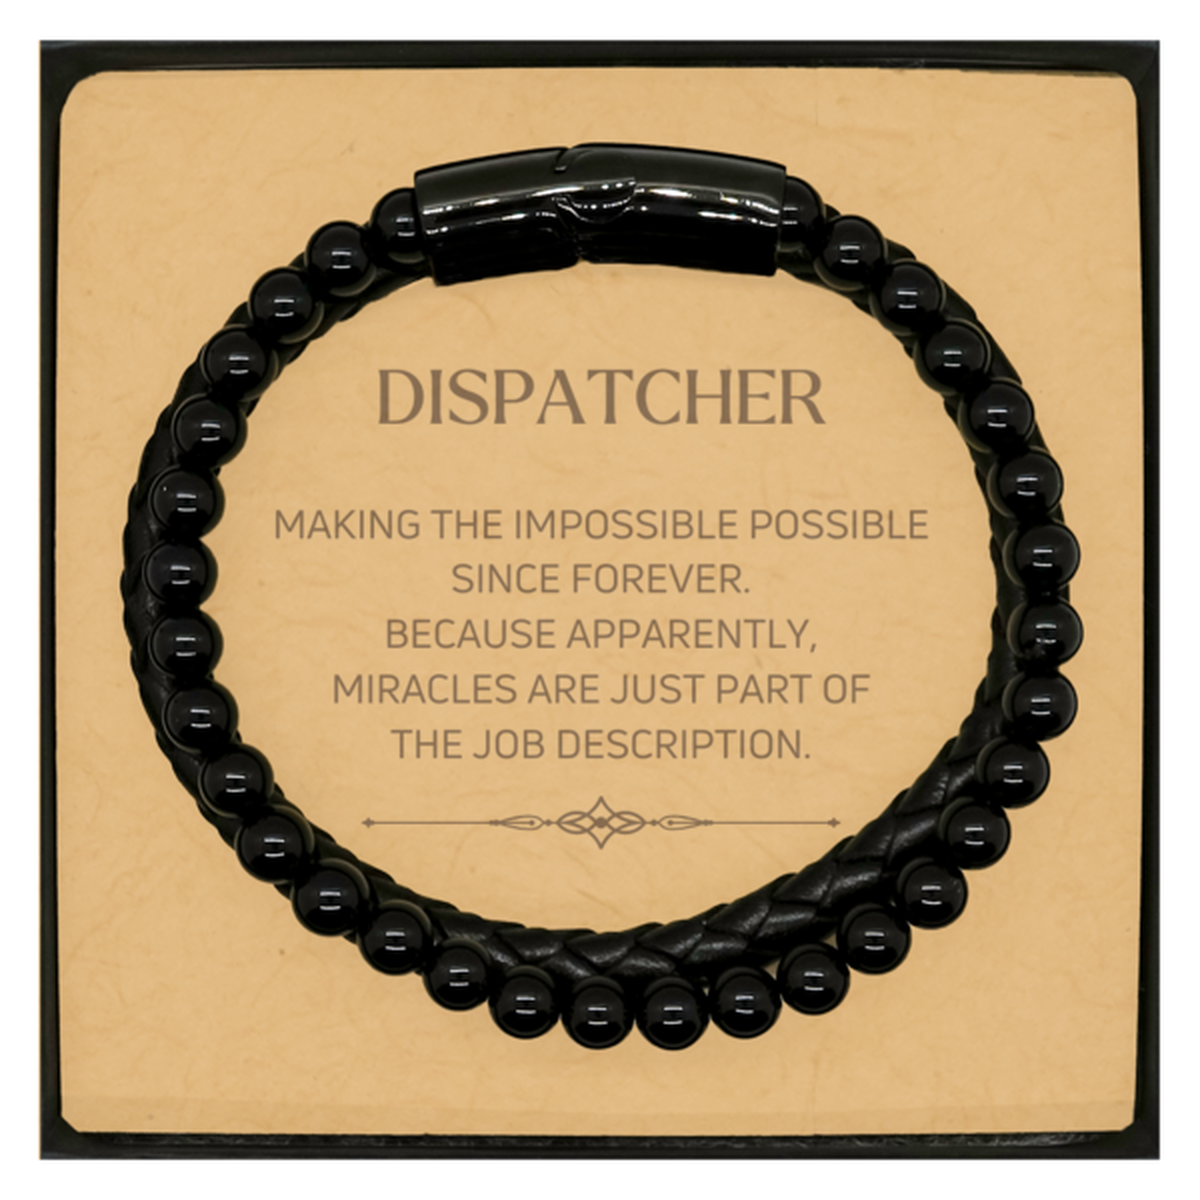 Funny Dispatcher Gifts, Miracles are just part of the job description, Inspirational Birthday Christmas Stone Leather Bracelets For Dispatcher, Men, Women, Coworkers, Friends, Boss